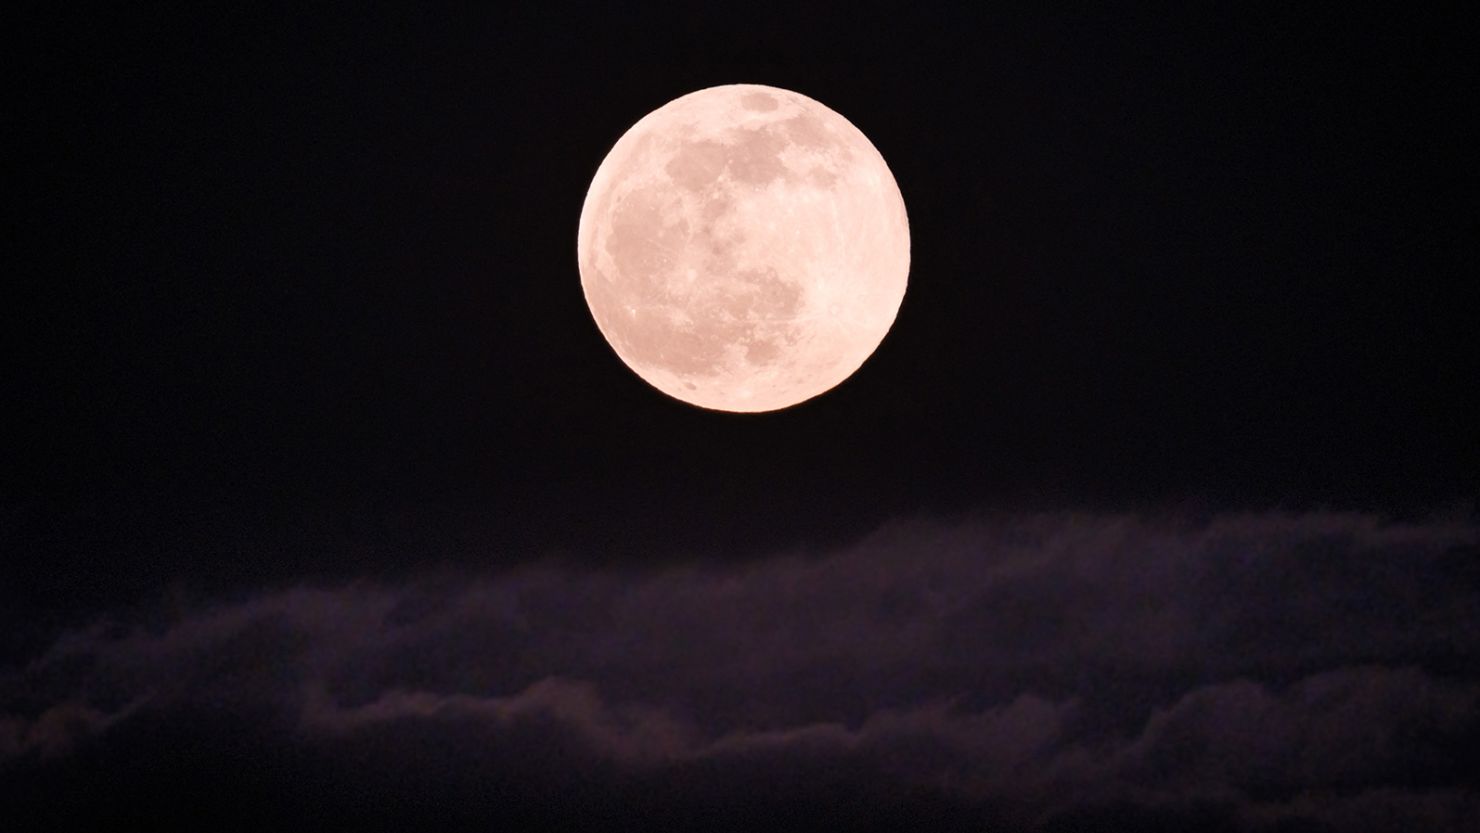 See April's full pink moon this Wednesday night